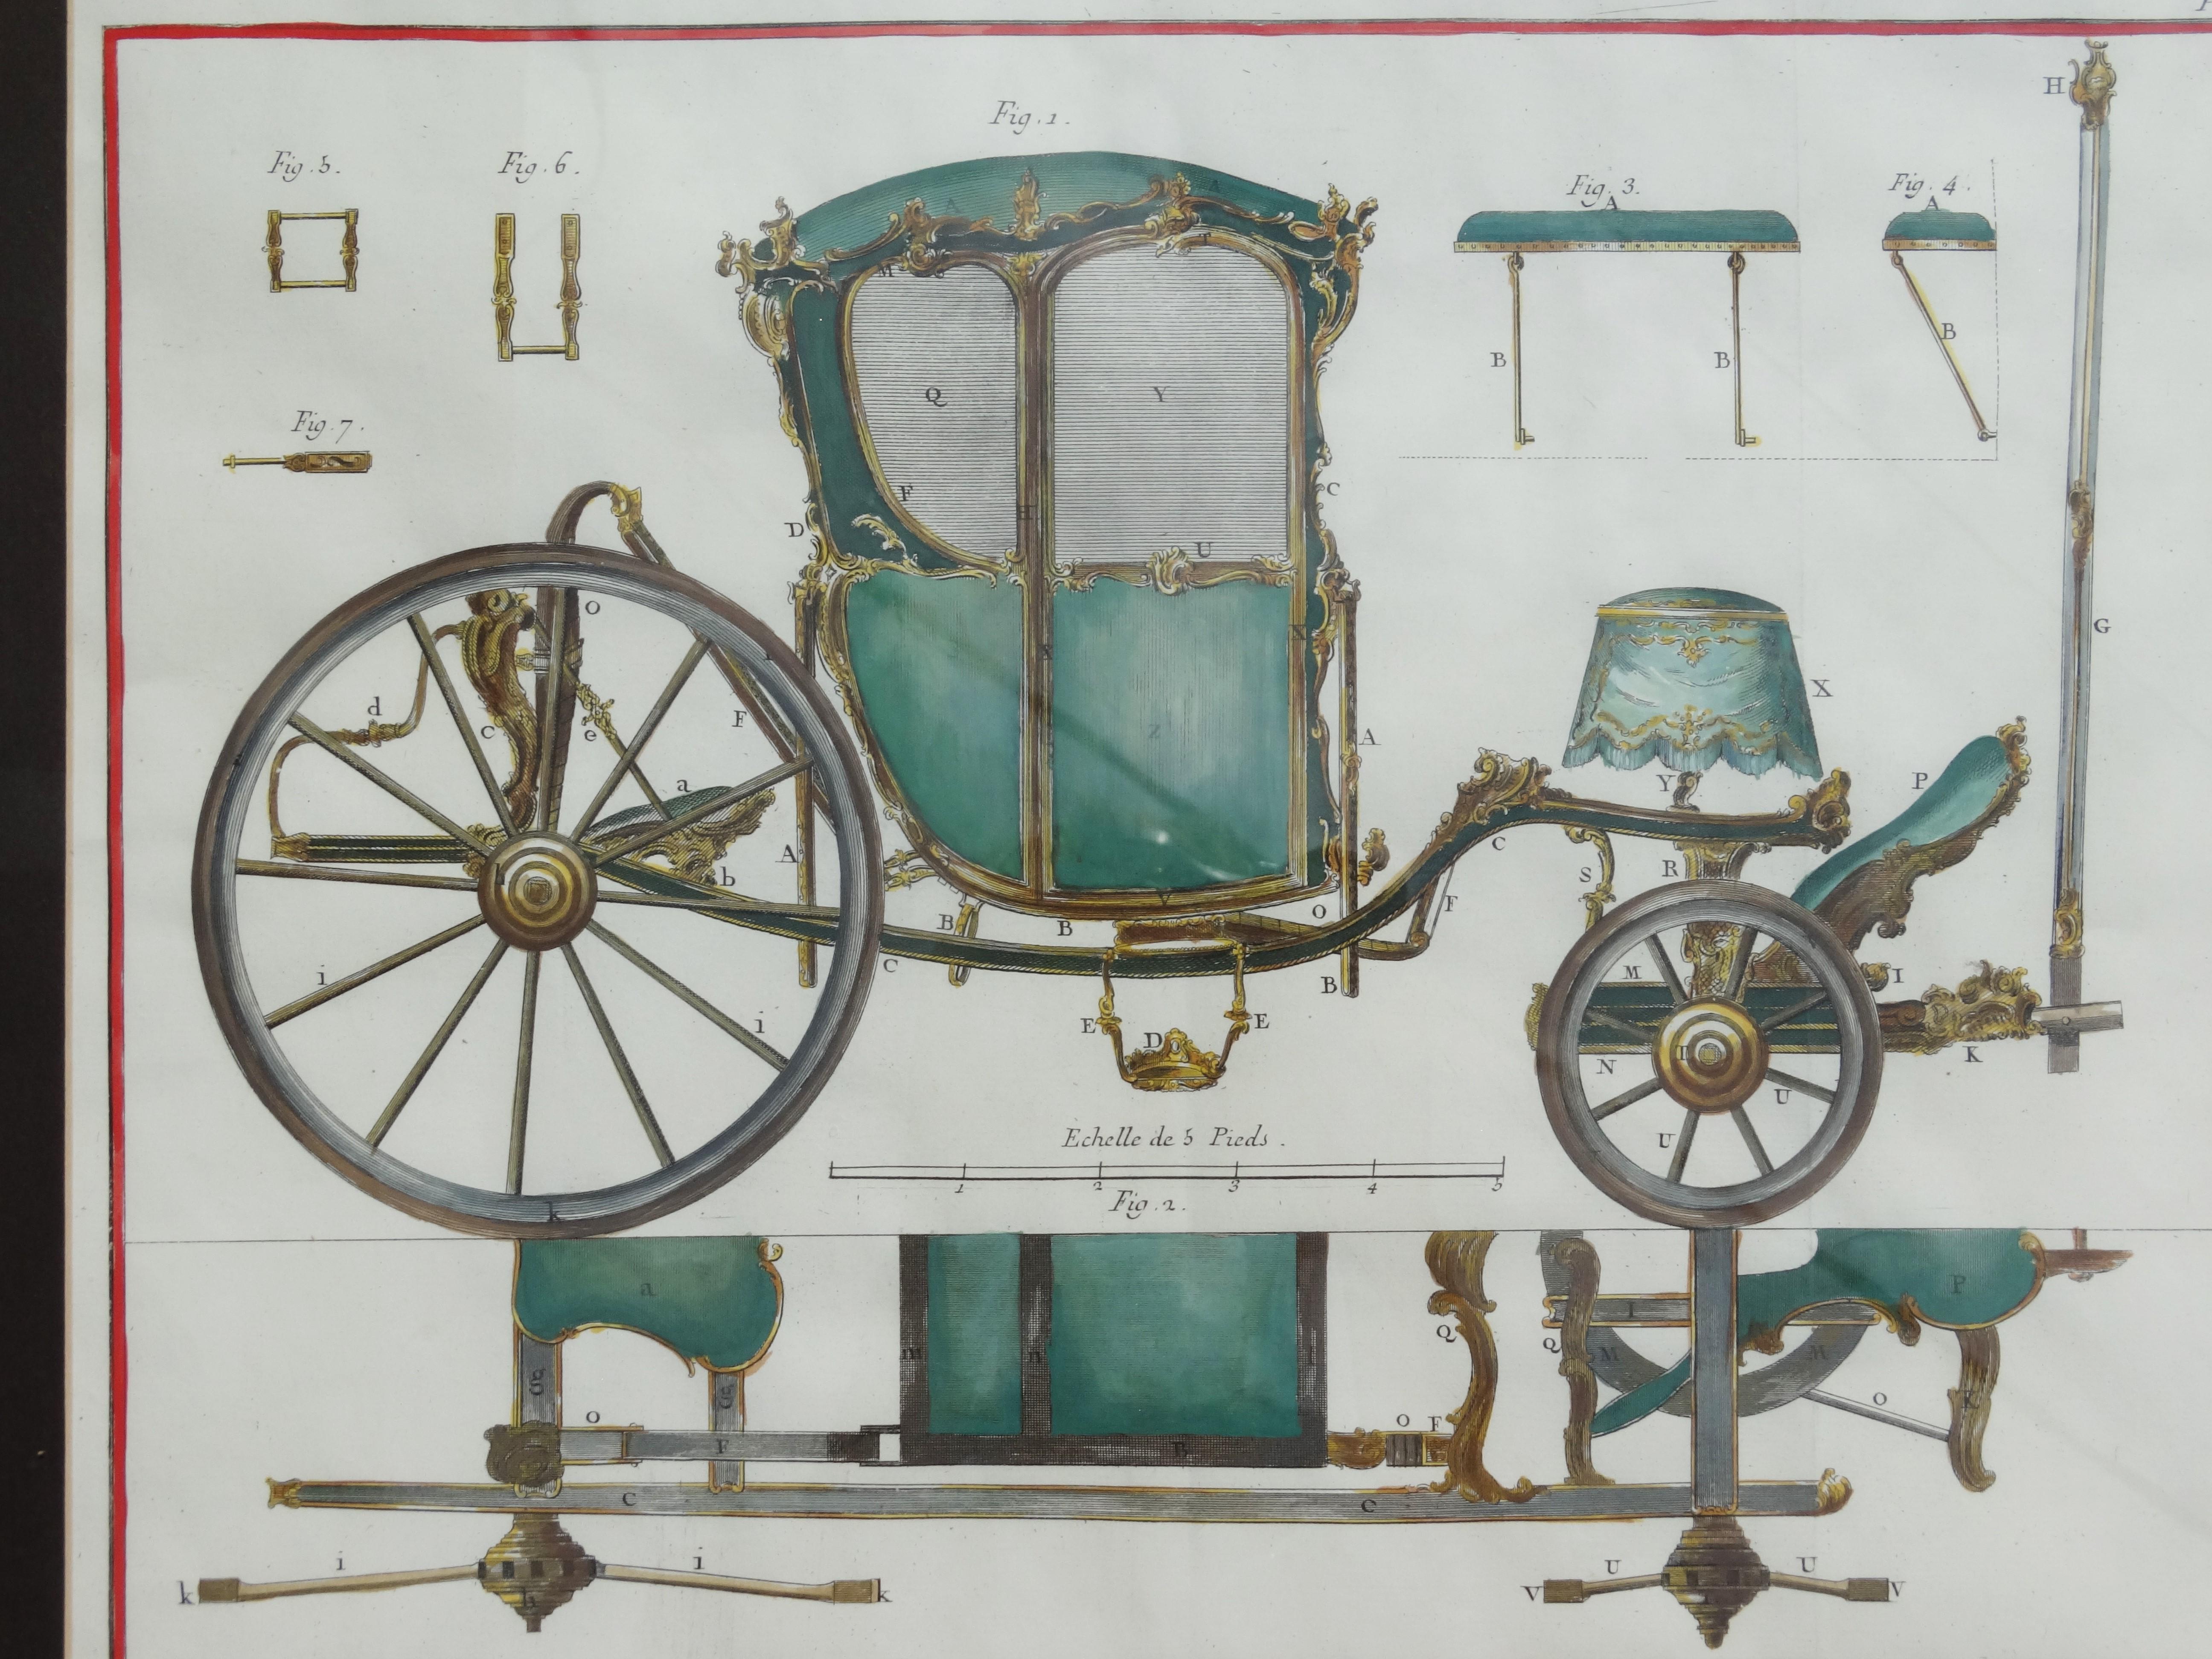 Horse Carriages a Pair of Hand Colored Copper Engravings by Denis Diderot circa 1754, Paris, France.

Prints come from the 